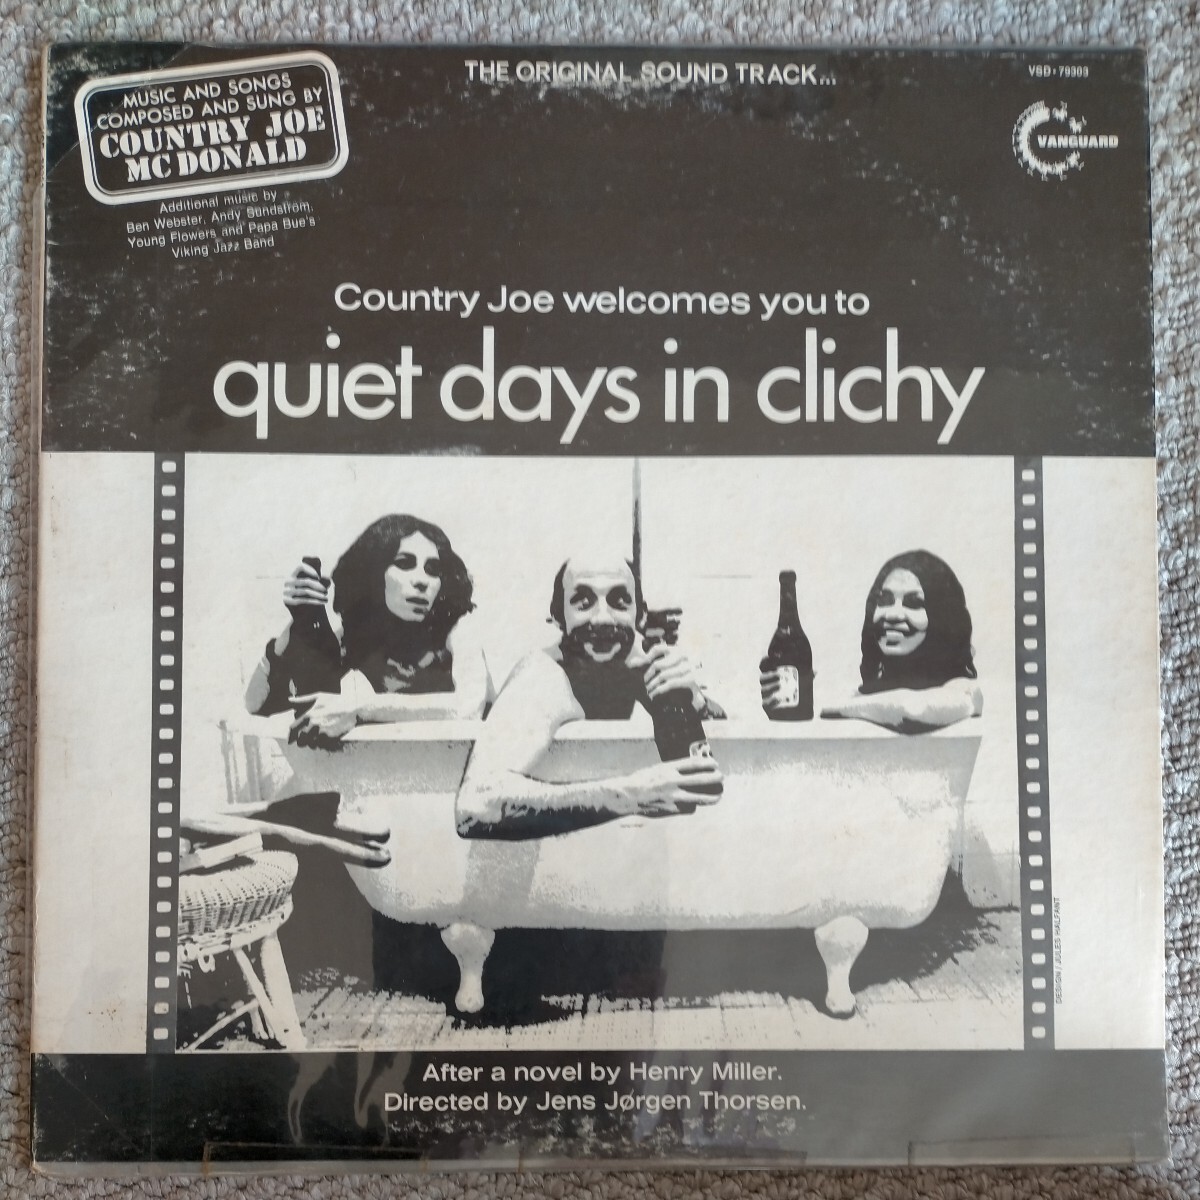 quiet days in clichy クリシーの静かな日々 country joe mcdonald . young flowers.andy sundstom モンドミュージック 鈴木慶一 _画像1